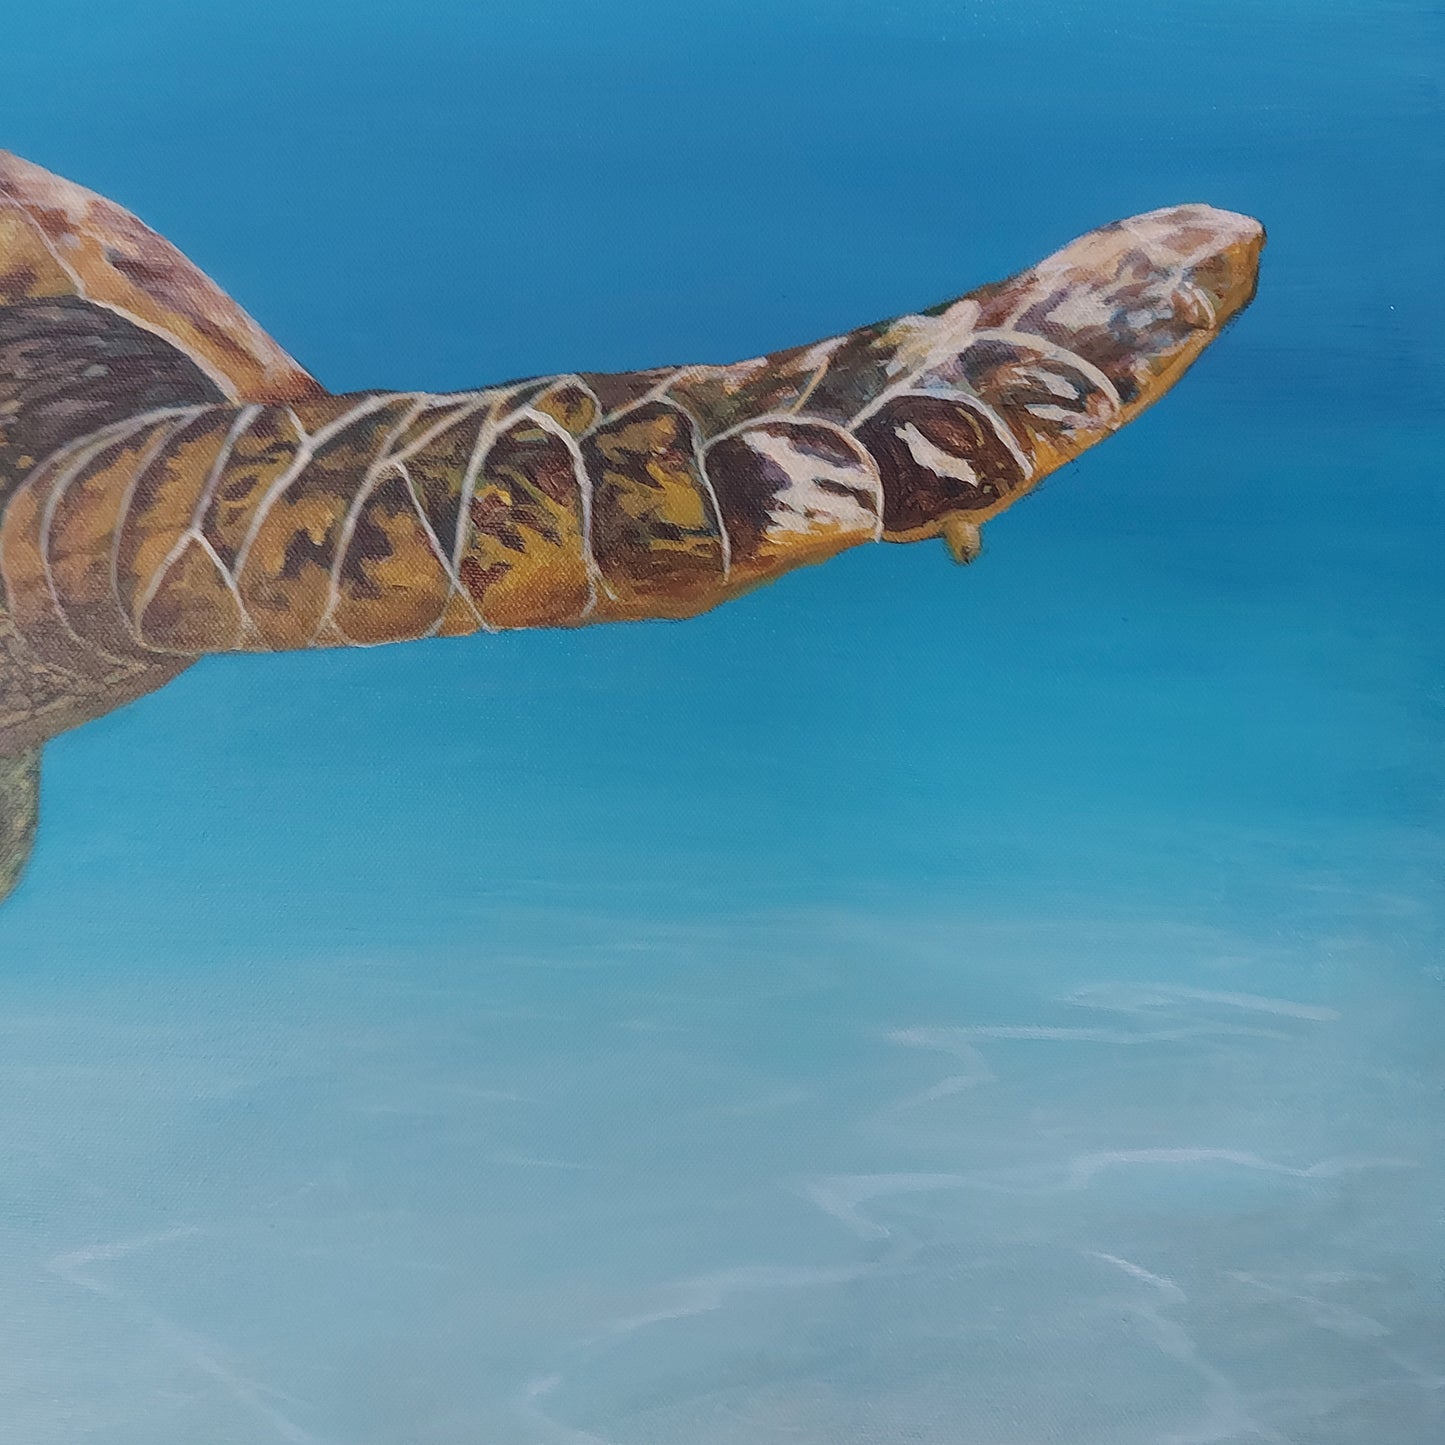 Colours of Life is an acrylic painting on canvas by Katherine Polack of a giant sea turtle underwater. The turtle is facing the viewer, gliding and swimming gracefully to remind us of the beauty and colours that exist in this world. The painting is 24 x 36" acrylic on canvas